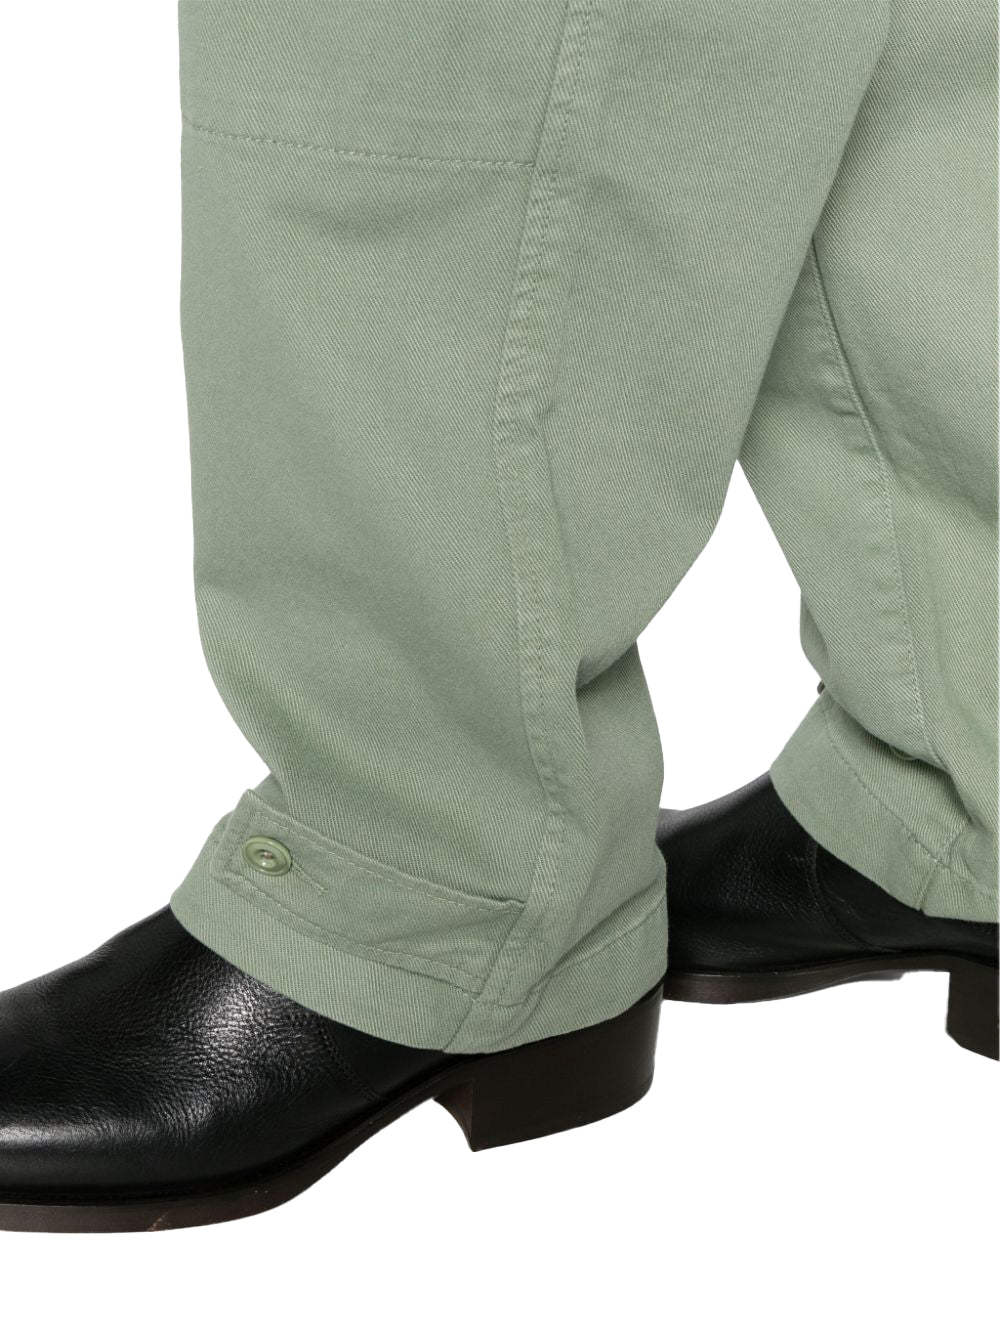 Military trousers with belt